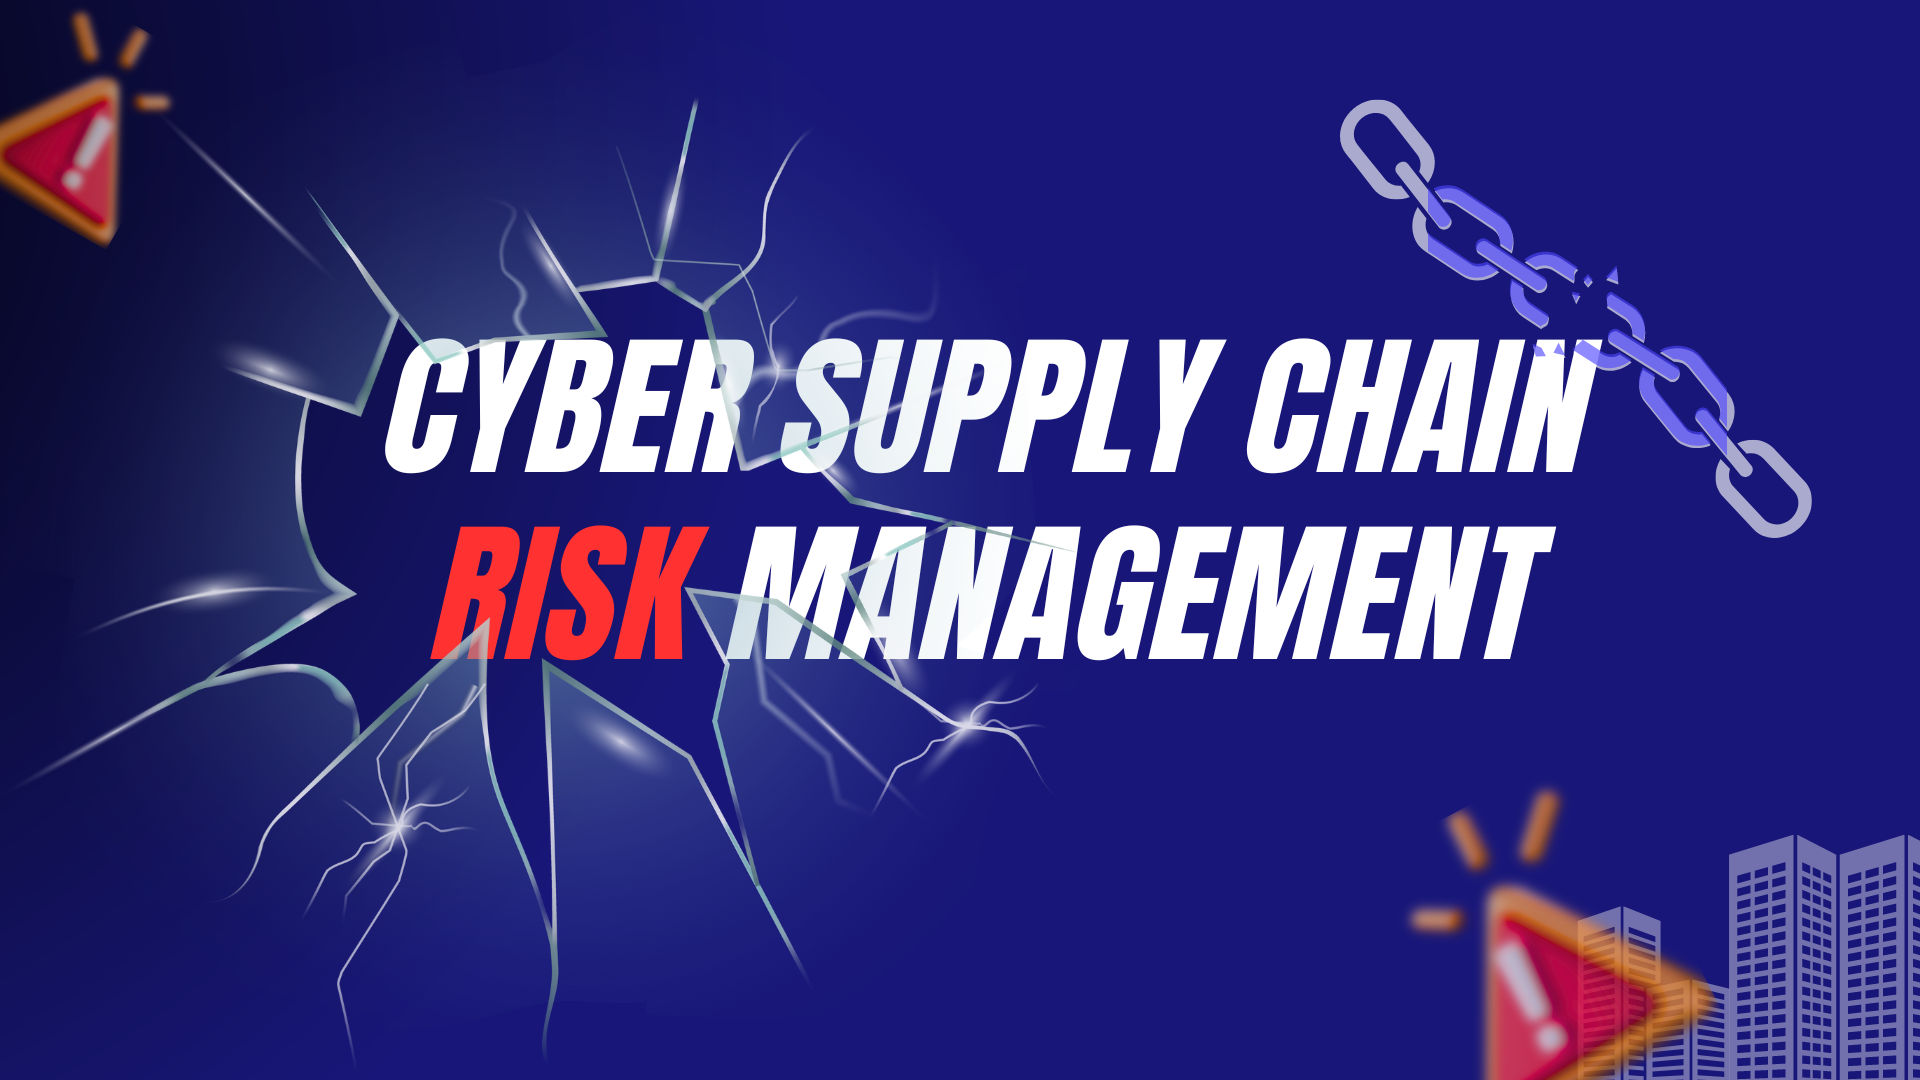 Cyber Supply Chain Risk Management, cyber security